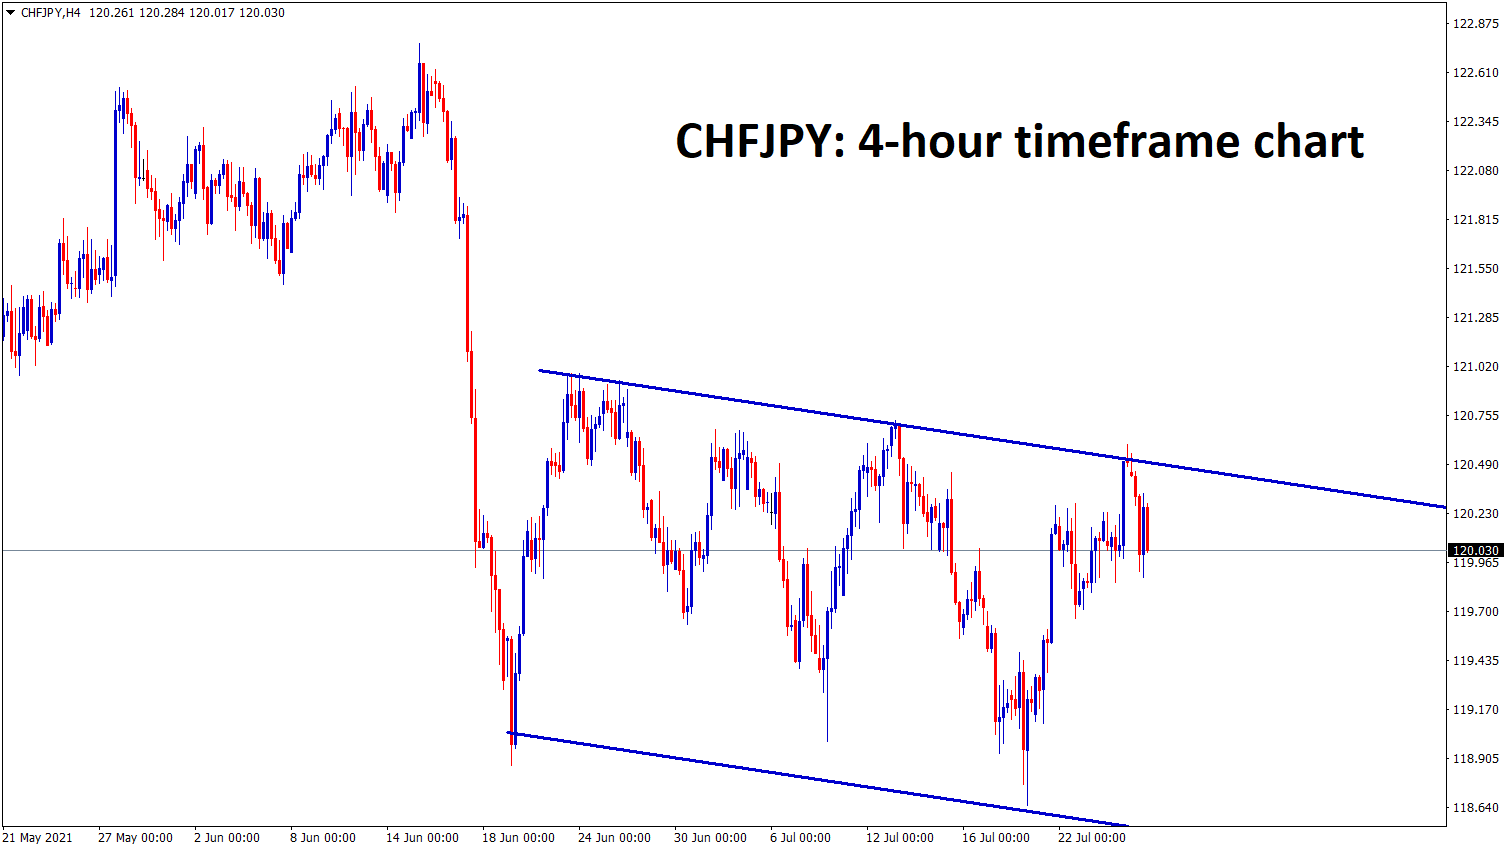 CHFJPY is moving up and down between the support and resistance ranges